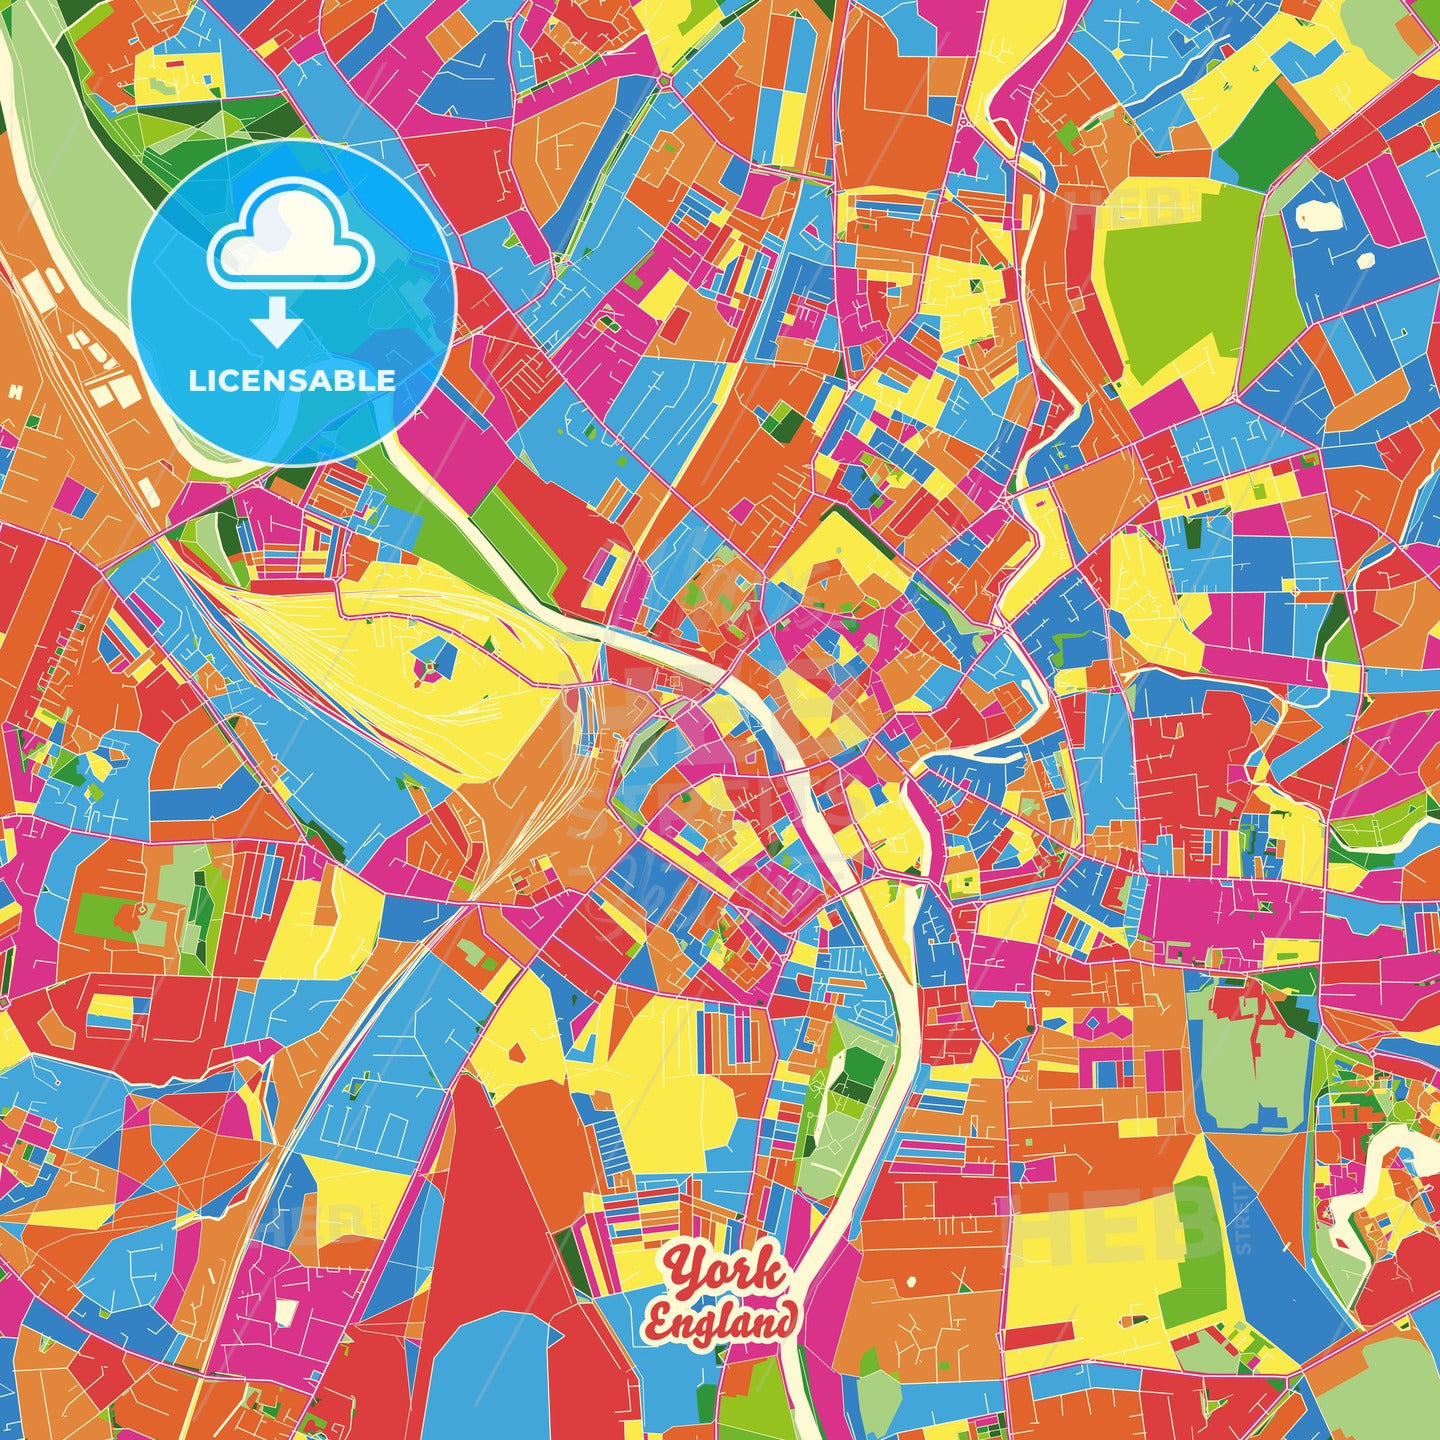 York, England Crazy Colorful Street Map Poster Template - HEBSTREITS Sketches